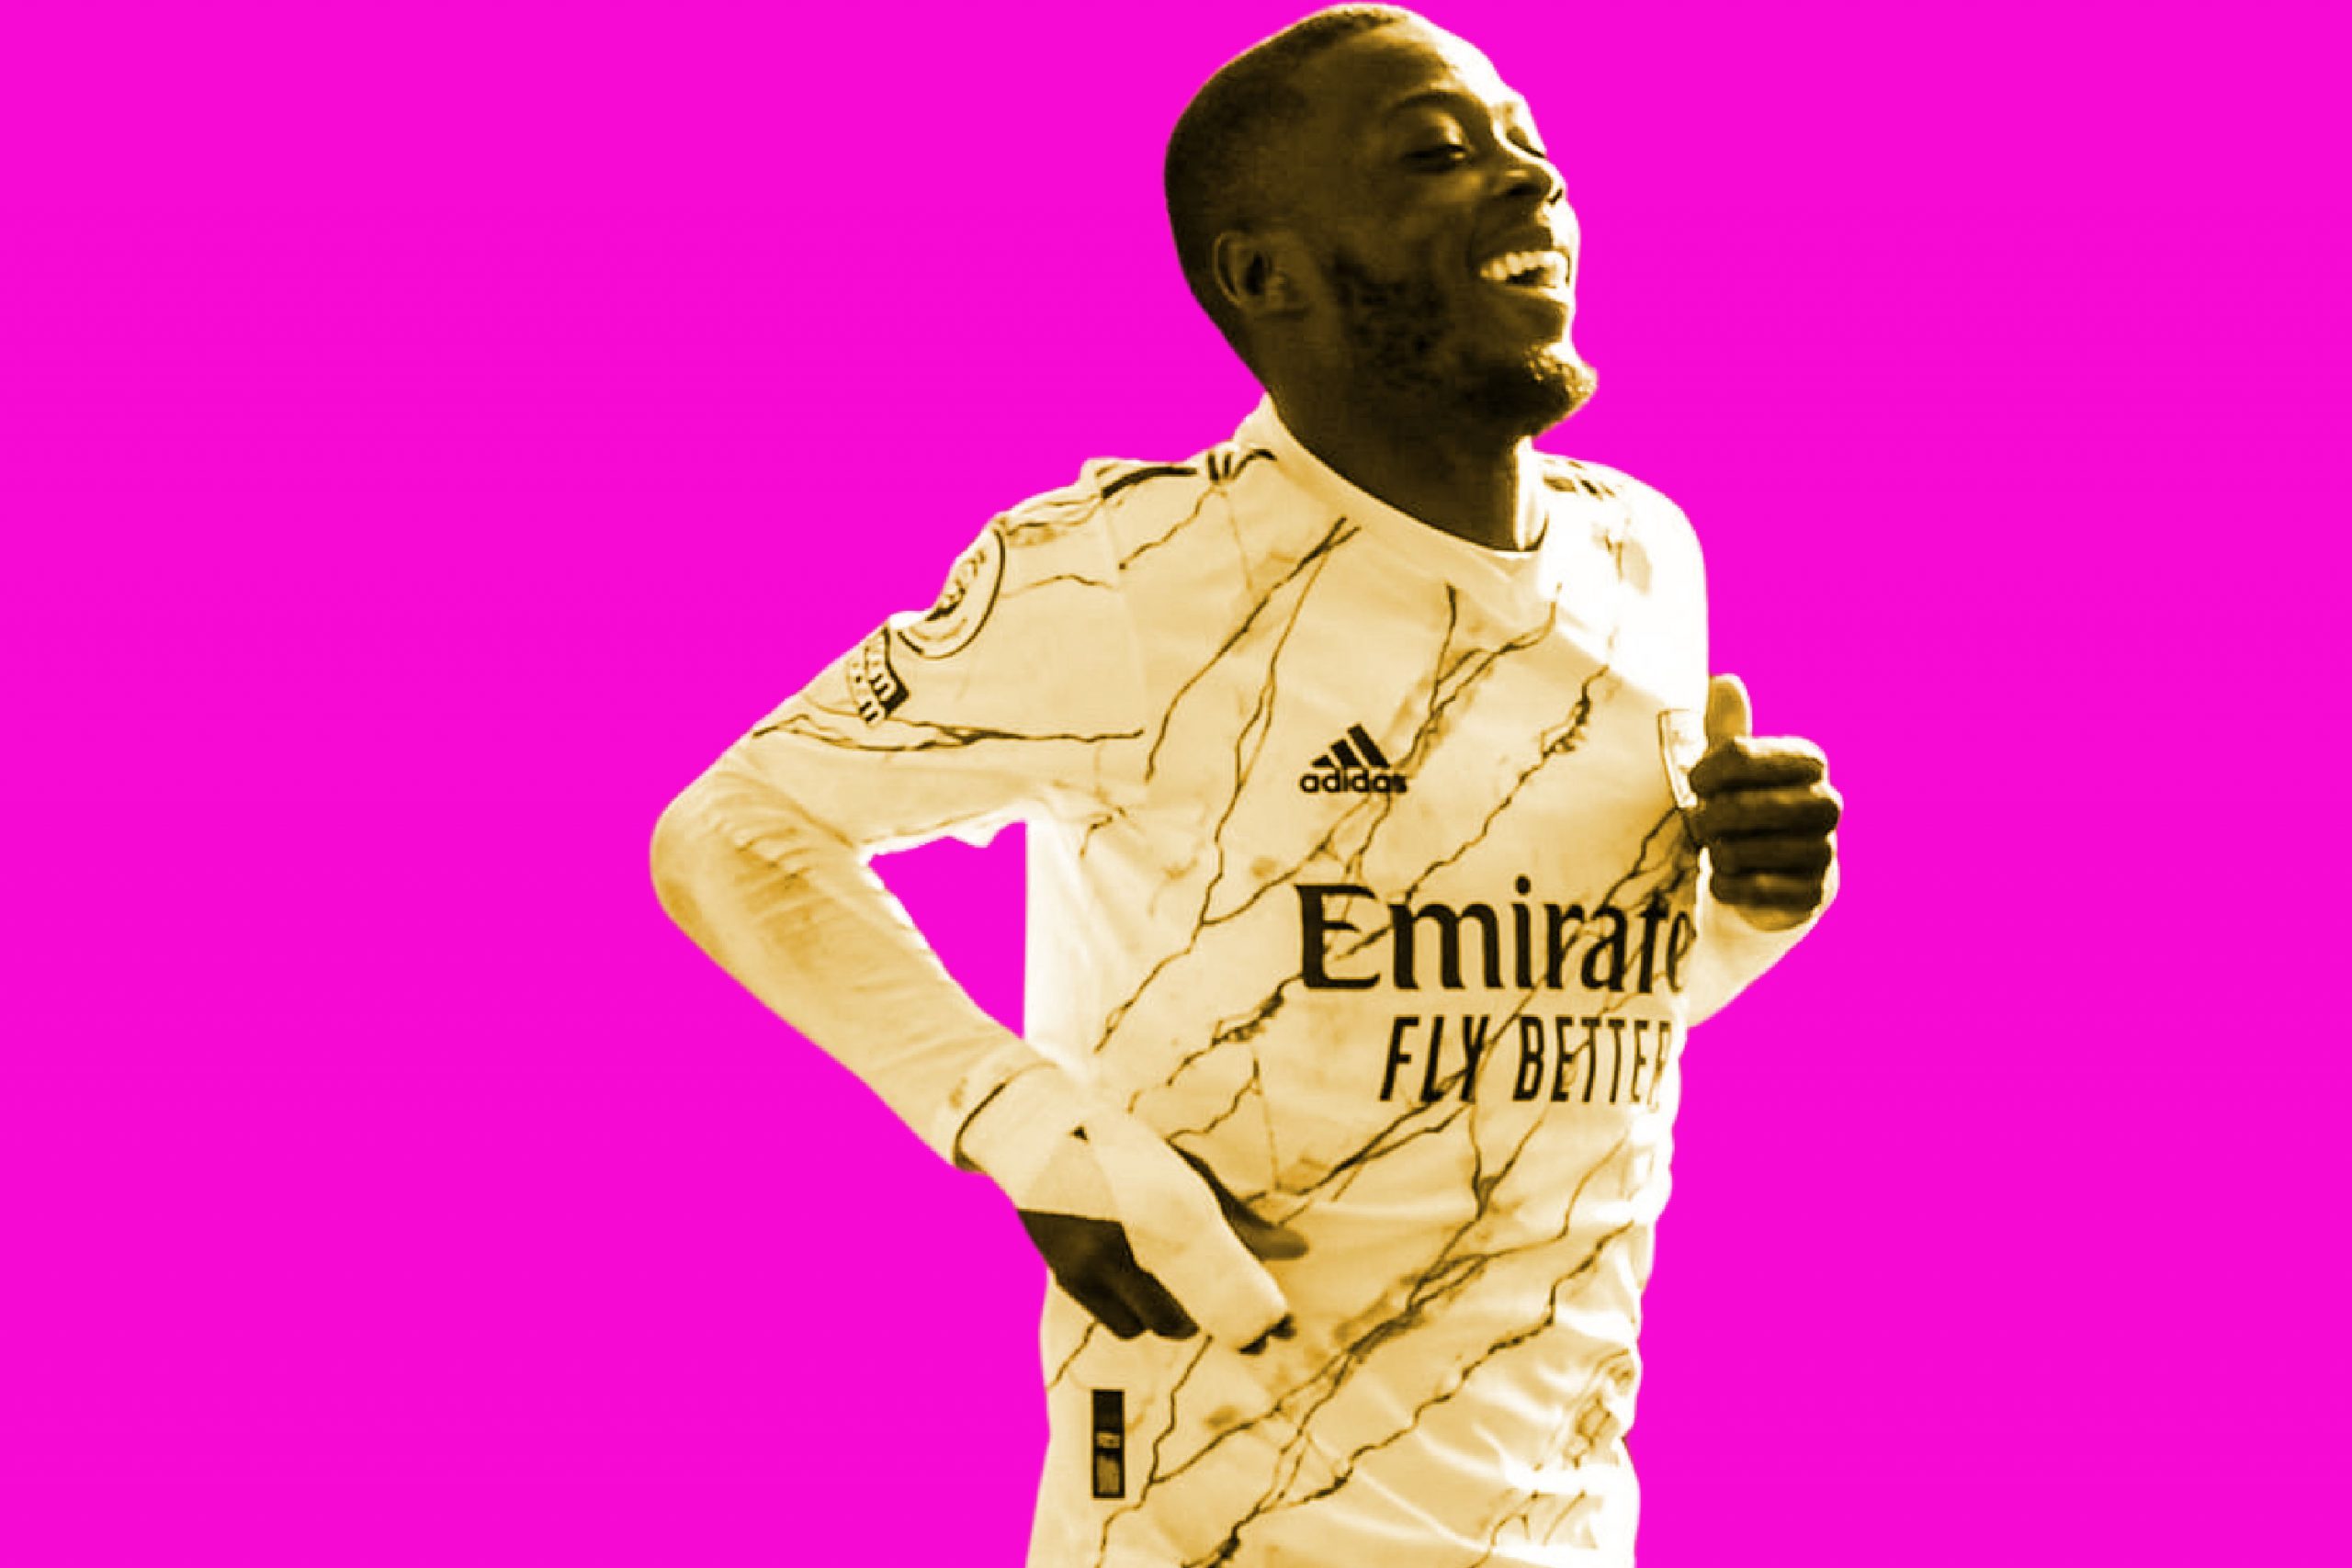 The vital element that is key to unlocking Nicolas Pepe according to Arsenal fans